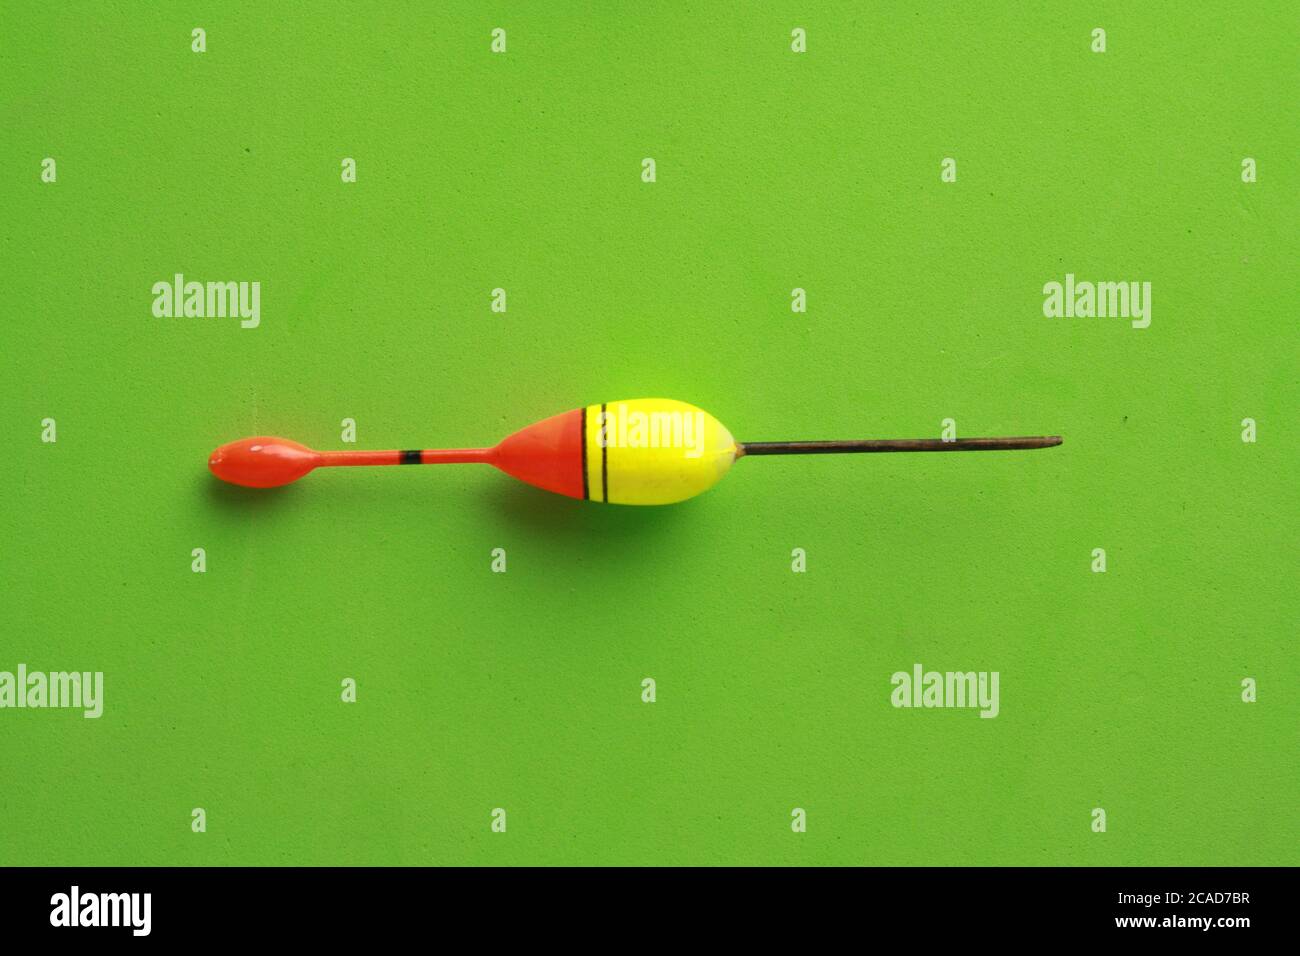 Top view of a colorful fishing rod bobber on a green background